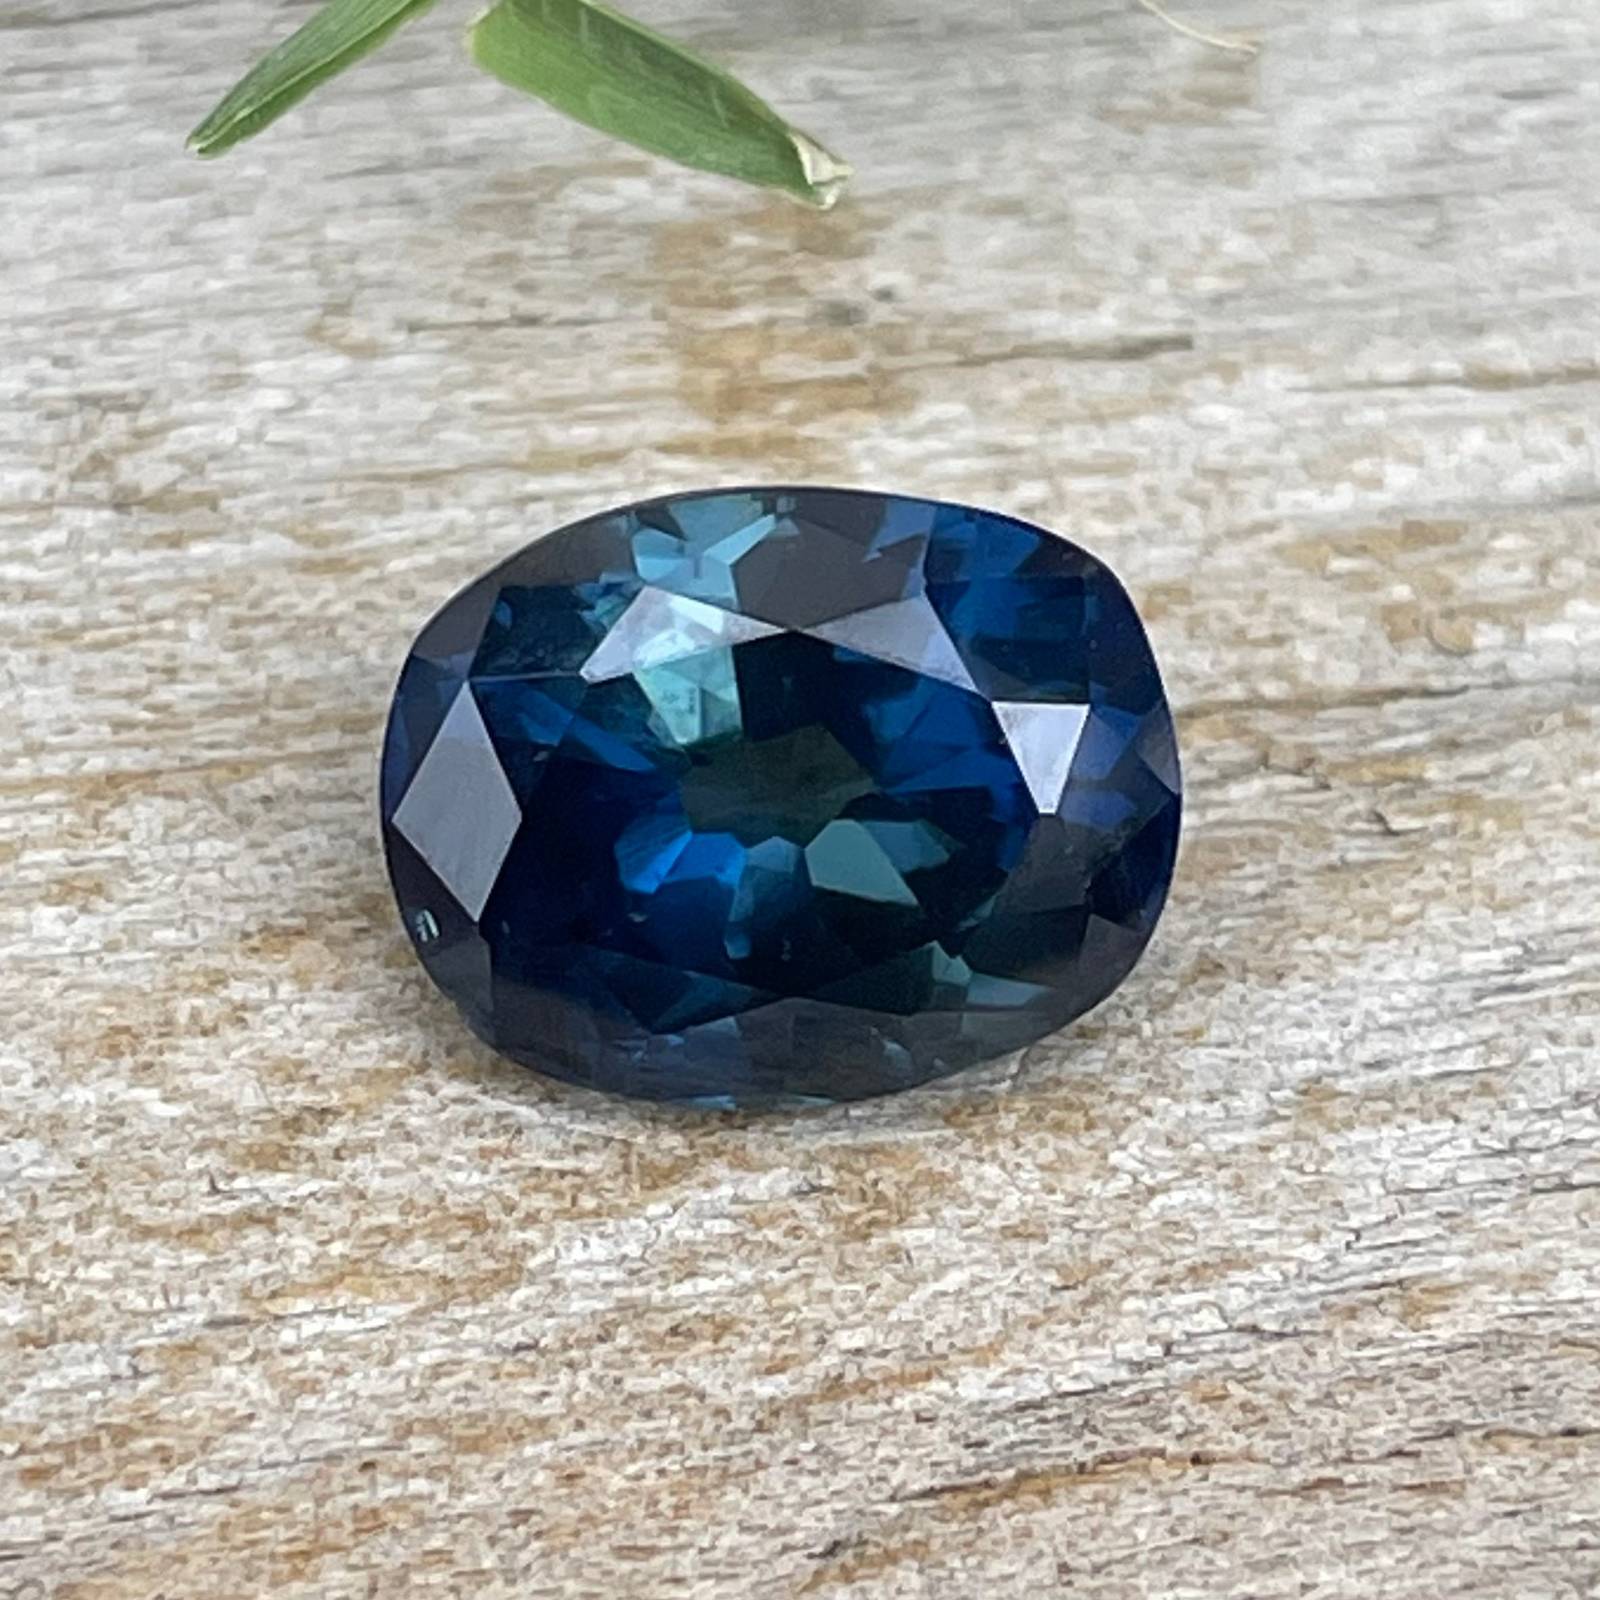 Primary image for Natural Blue Green Sapphire |  Cushion Cut | 9.28x7.24 mm | 2.75 Carat | Clean |